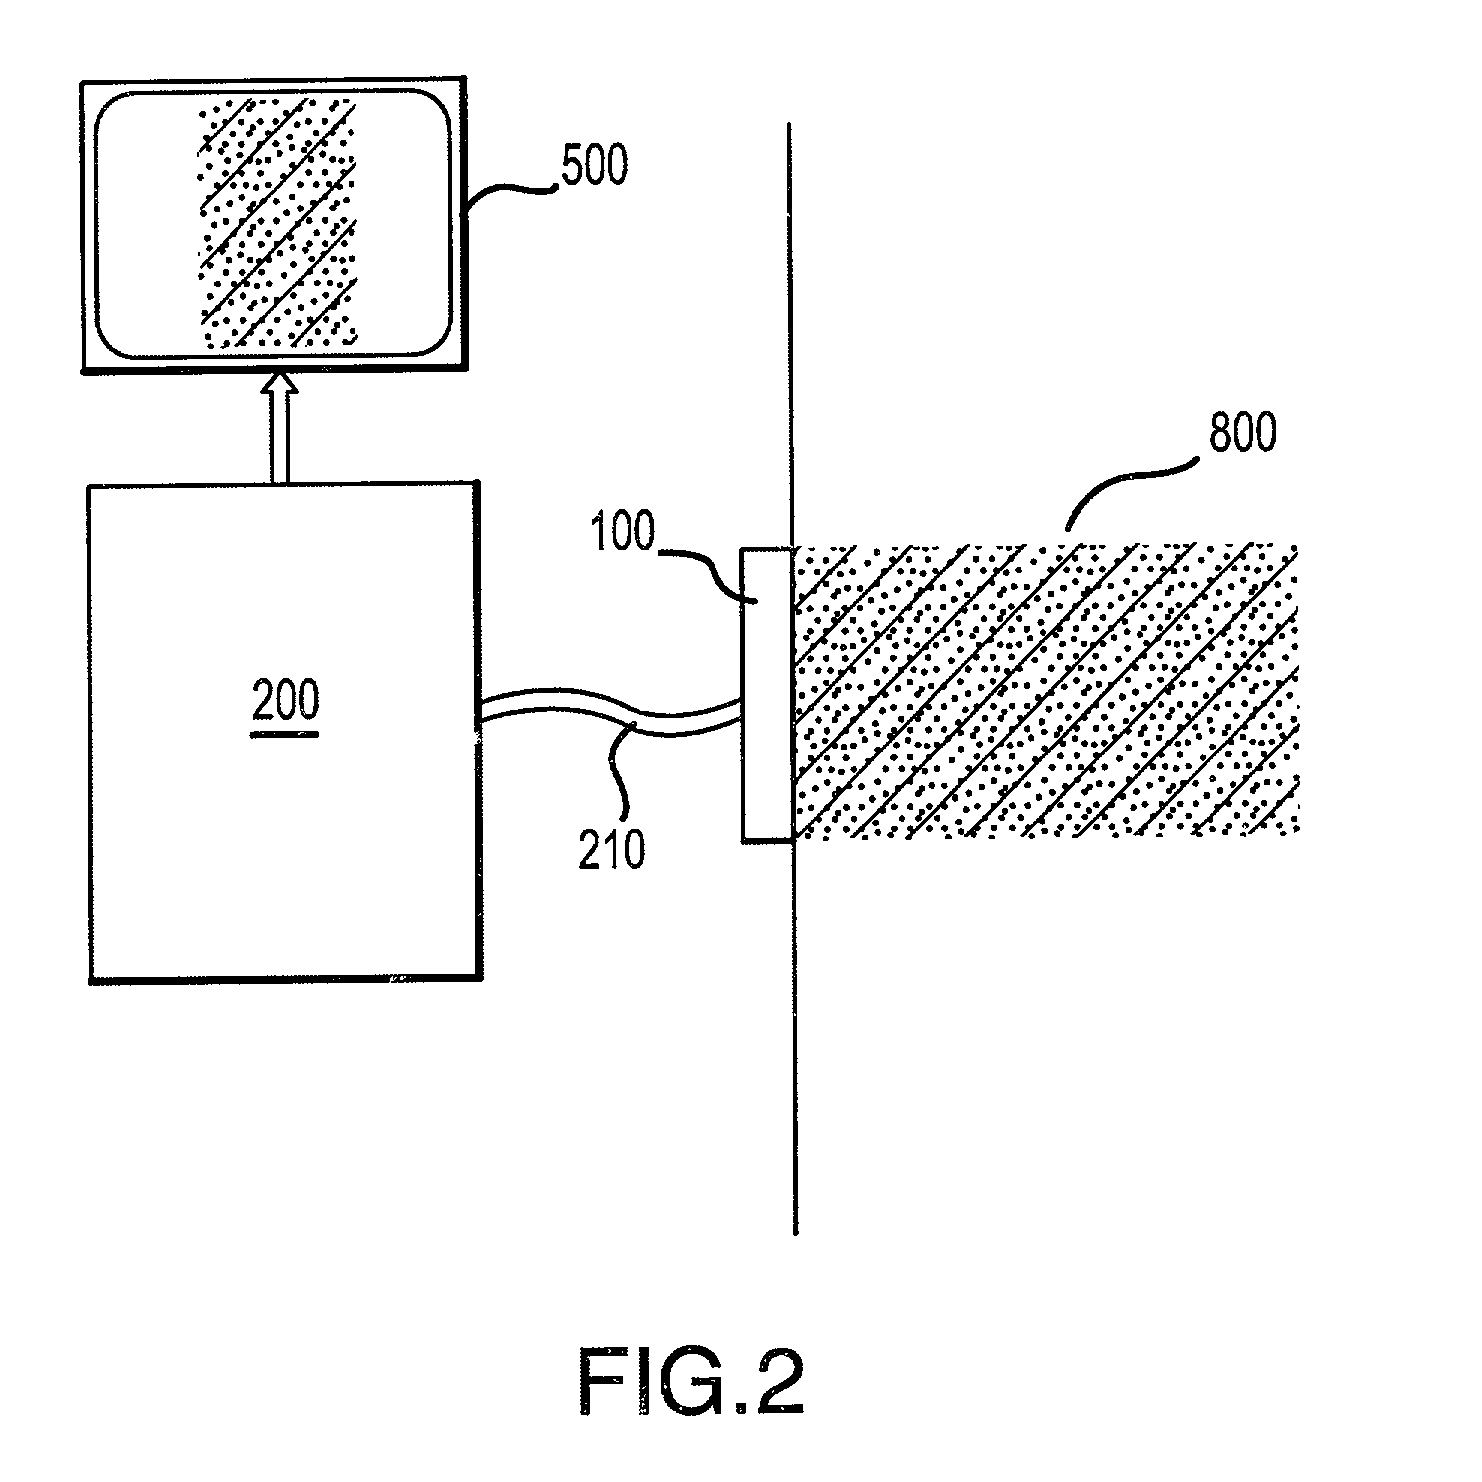 Imaging, Therapy, and temperature monitoring ultrasonic system